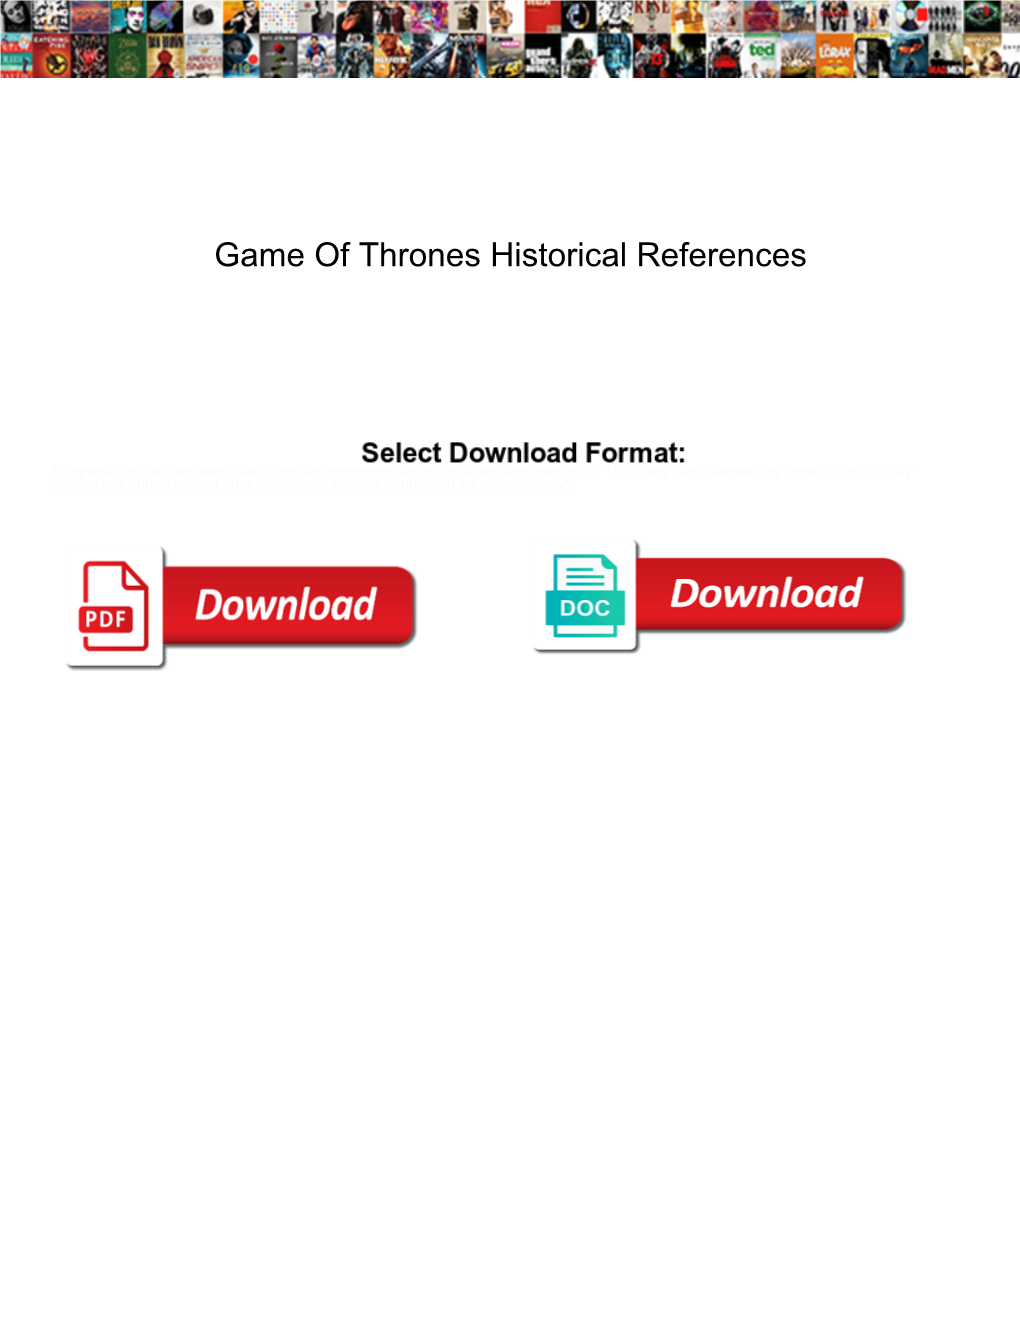 Game of Thrones Historical References